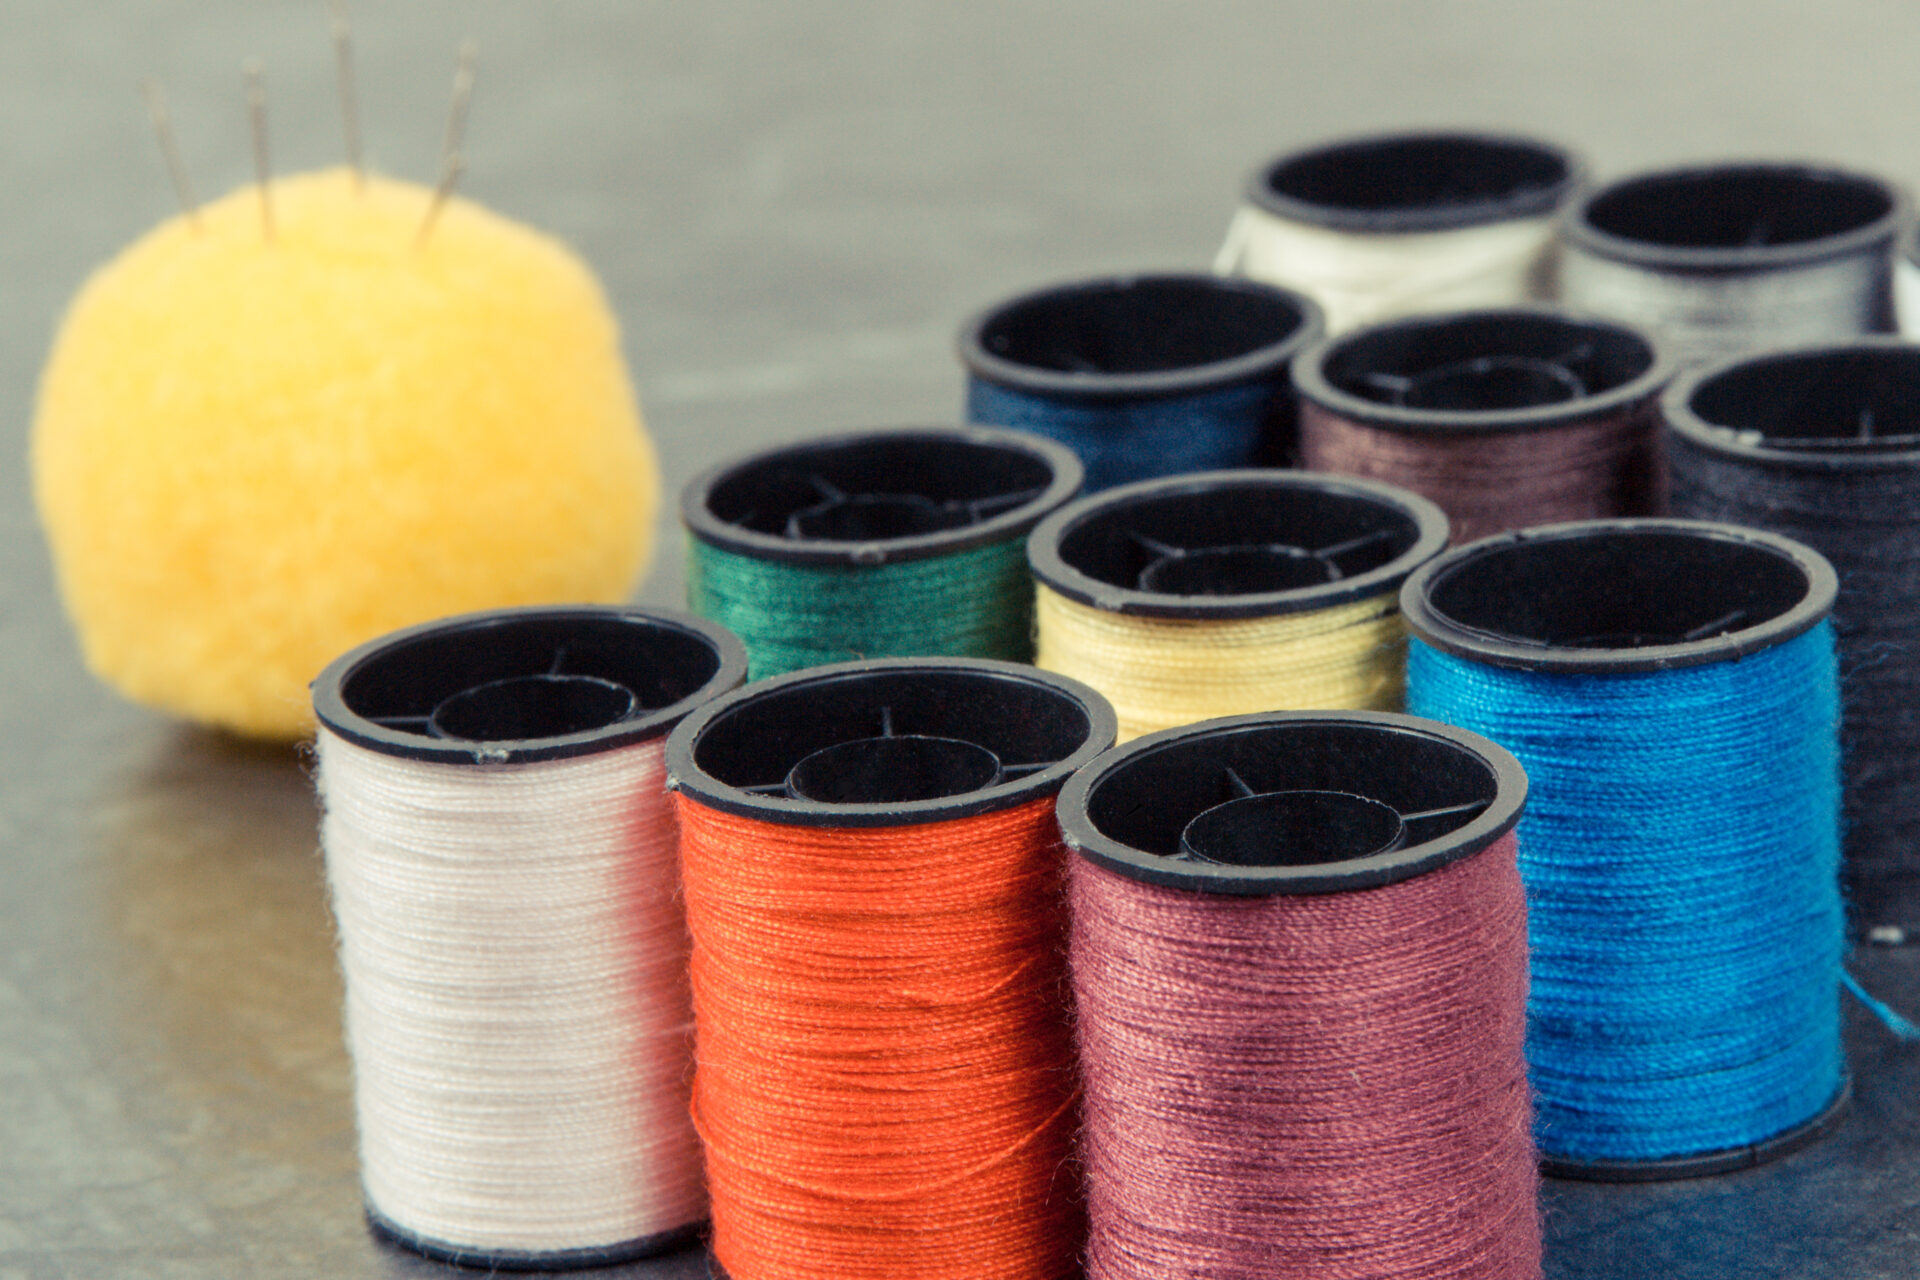 Spools of colorful thread and needle. Accessories for sewing, needlework and embroidery